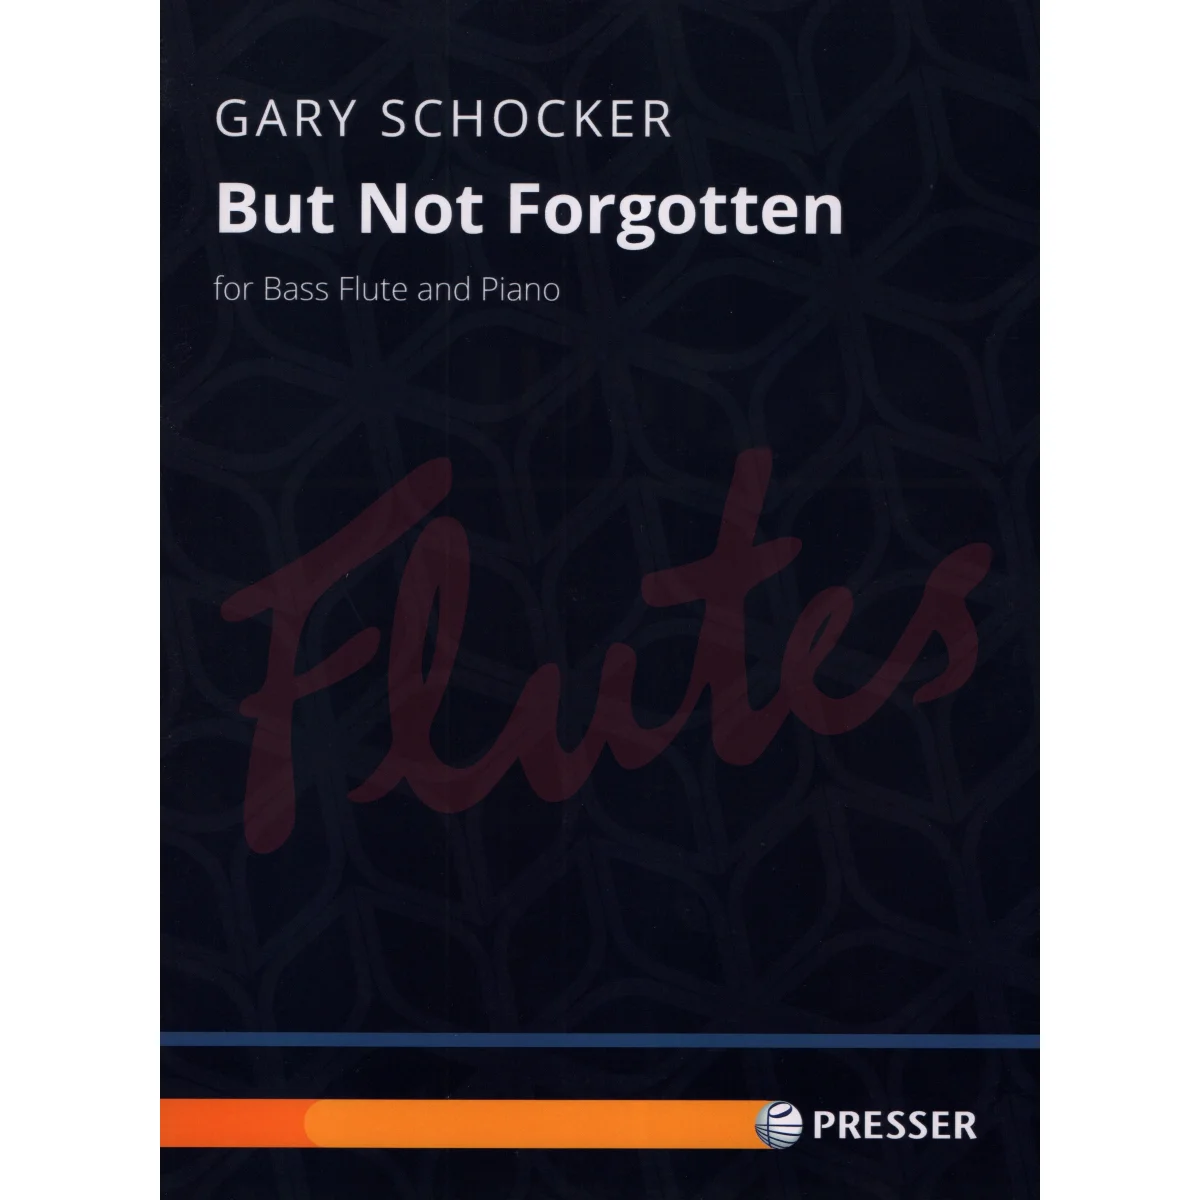 But Not Forgotten for Bass Flute and Piano